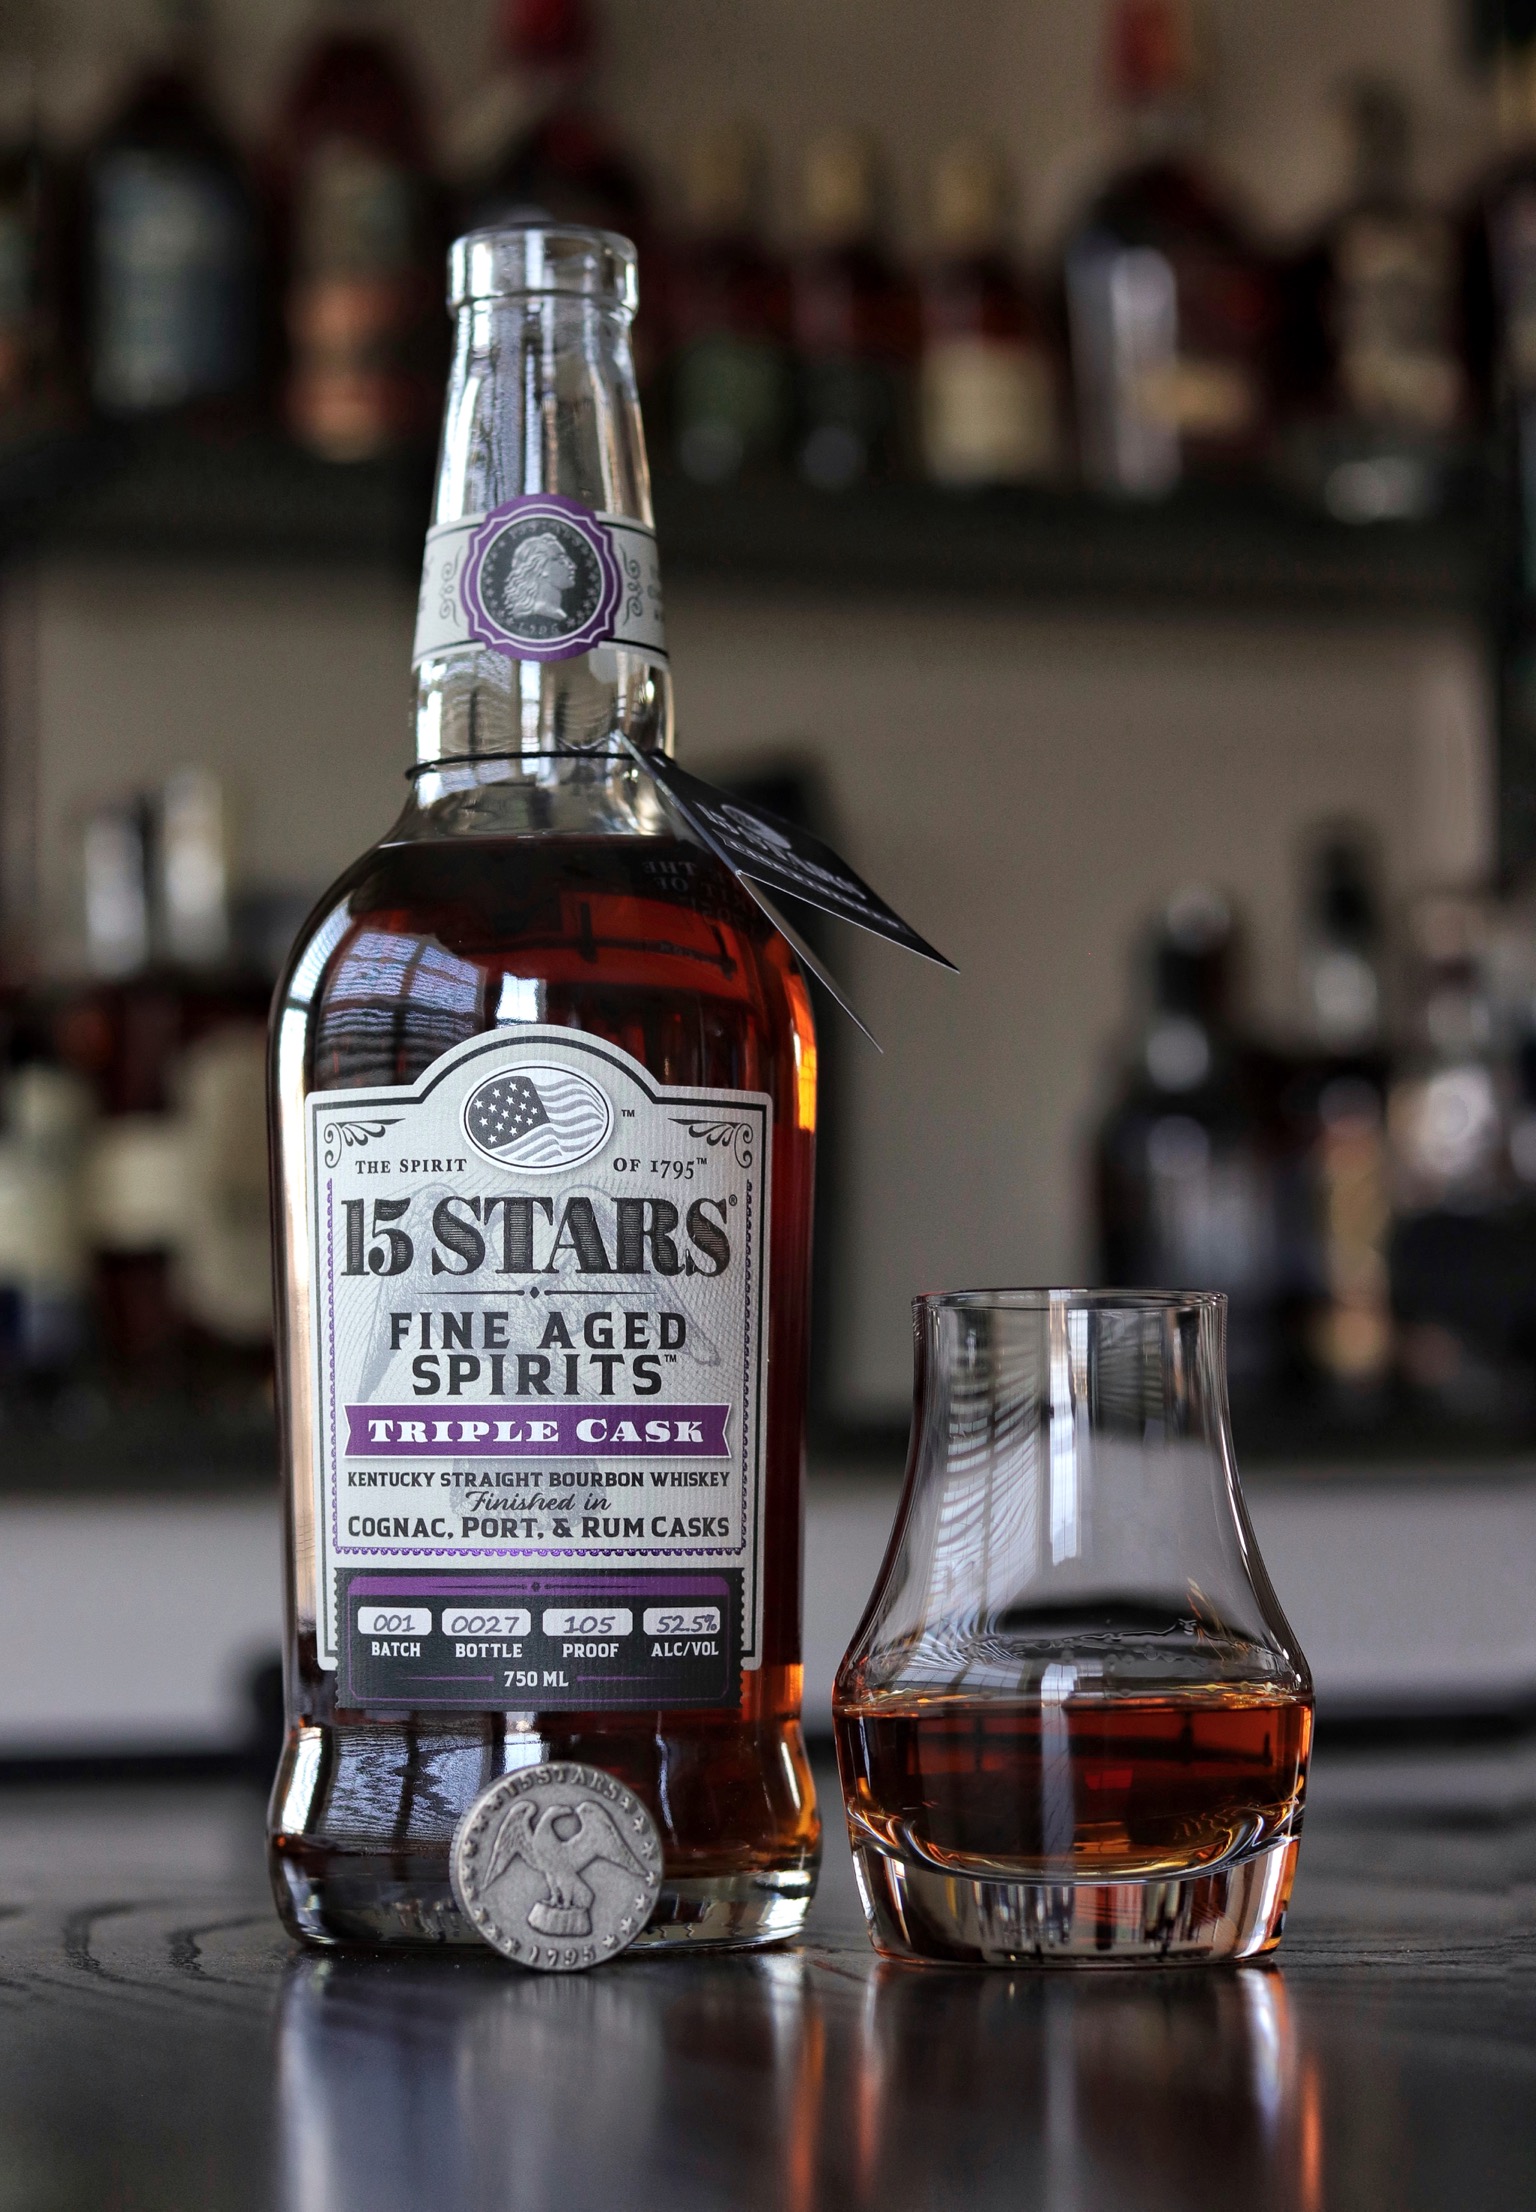 15 STARS Fine Aged Spirits Announces Two New Whiskies